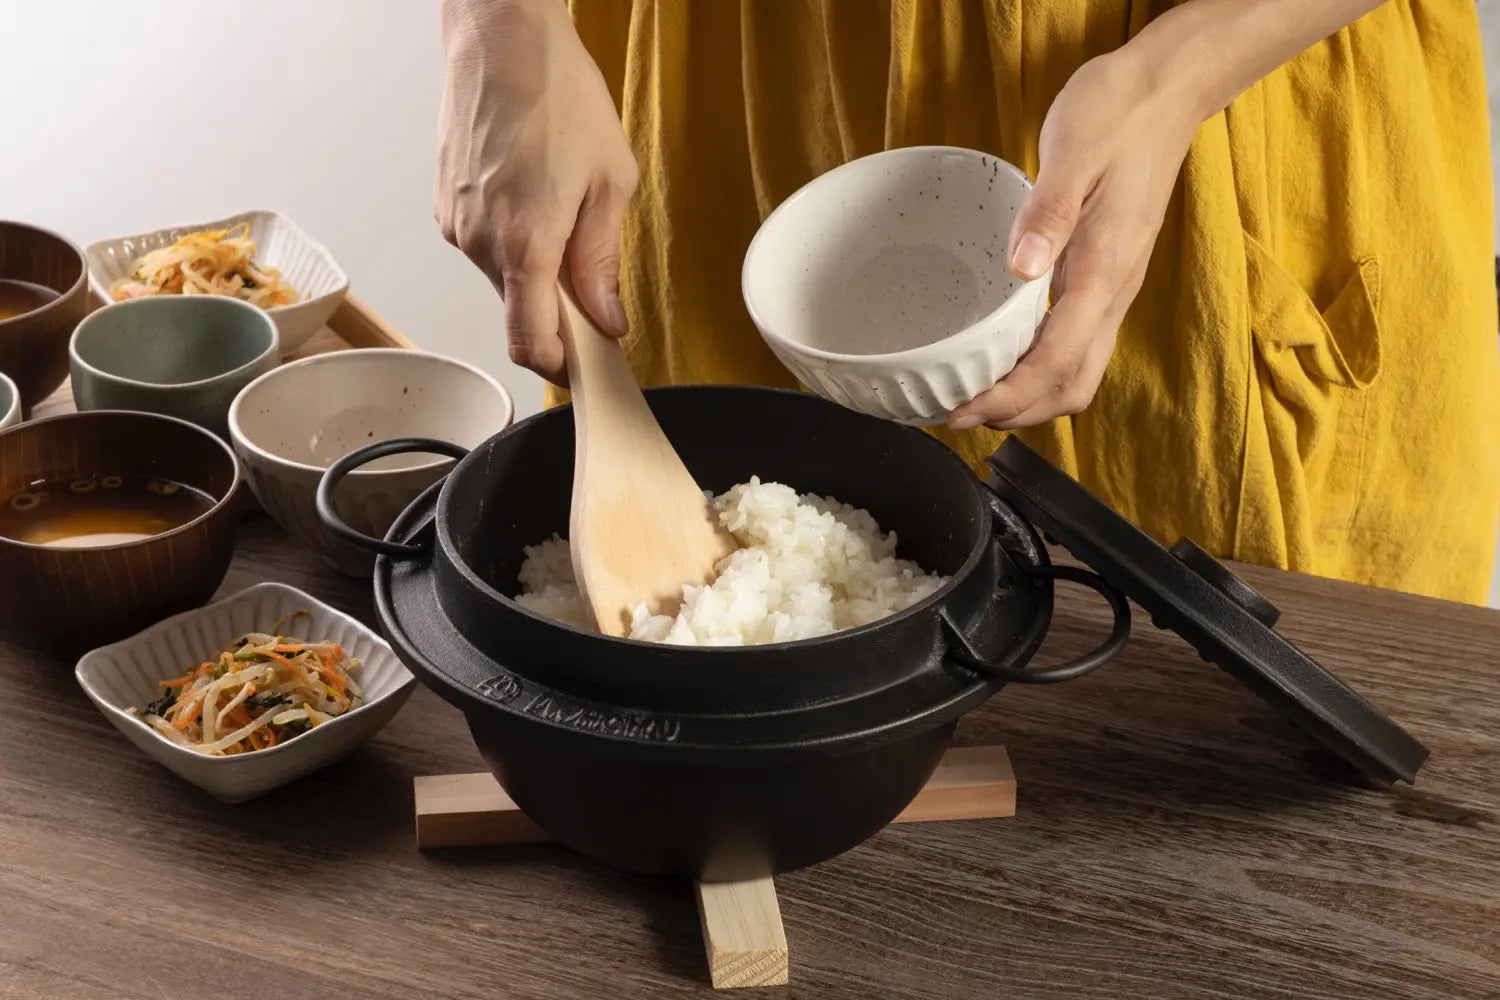 Making Rice in a Cast Iron Rice Cooker